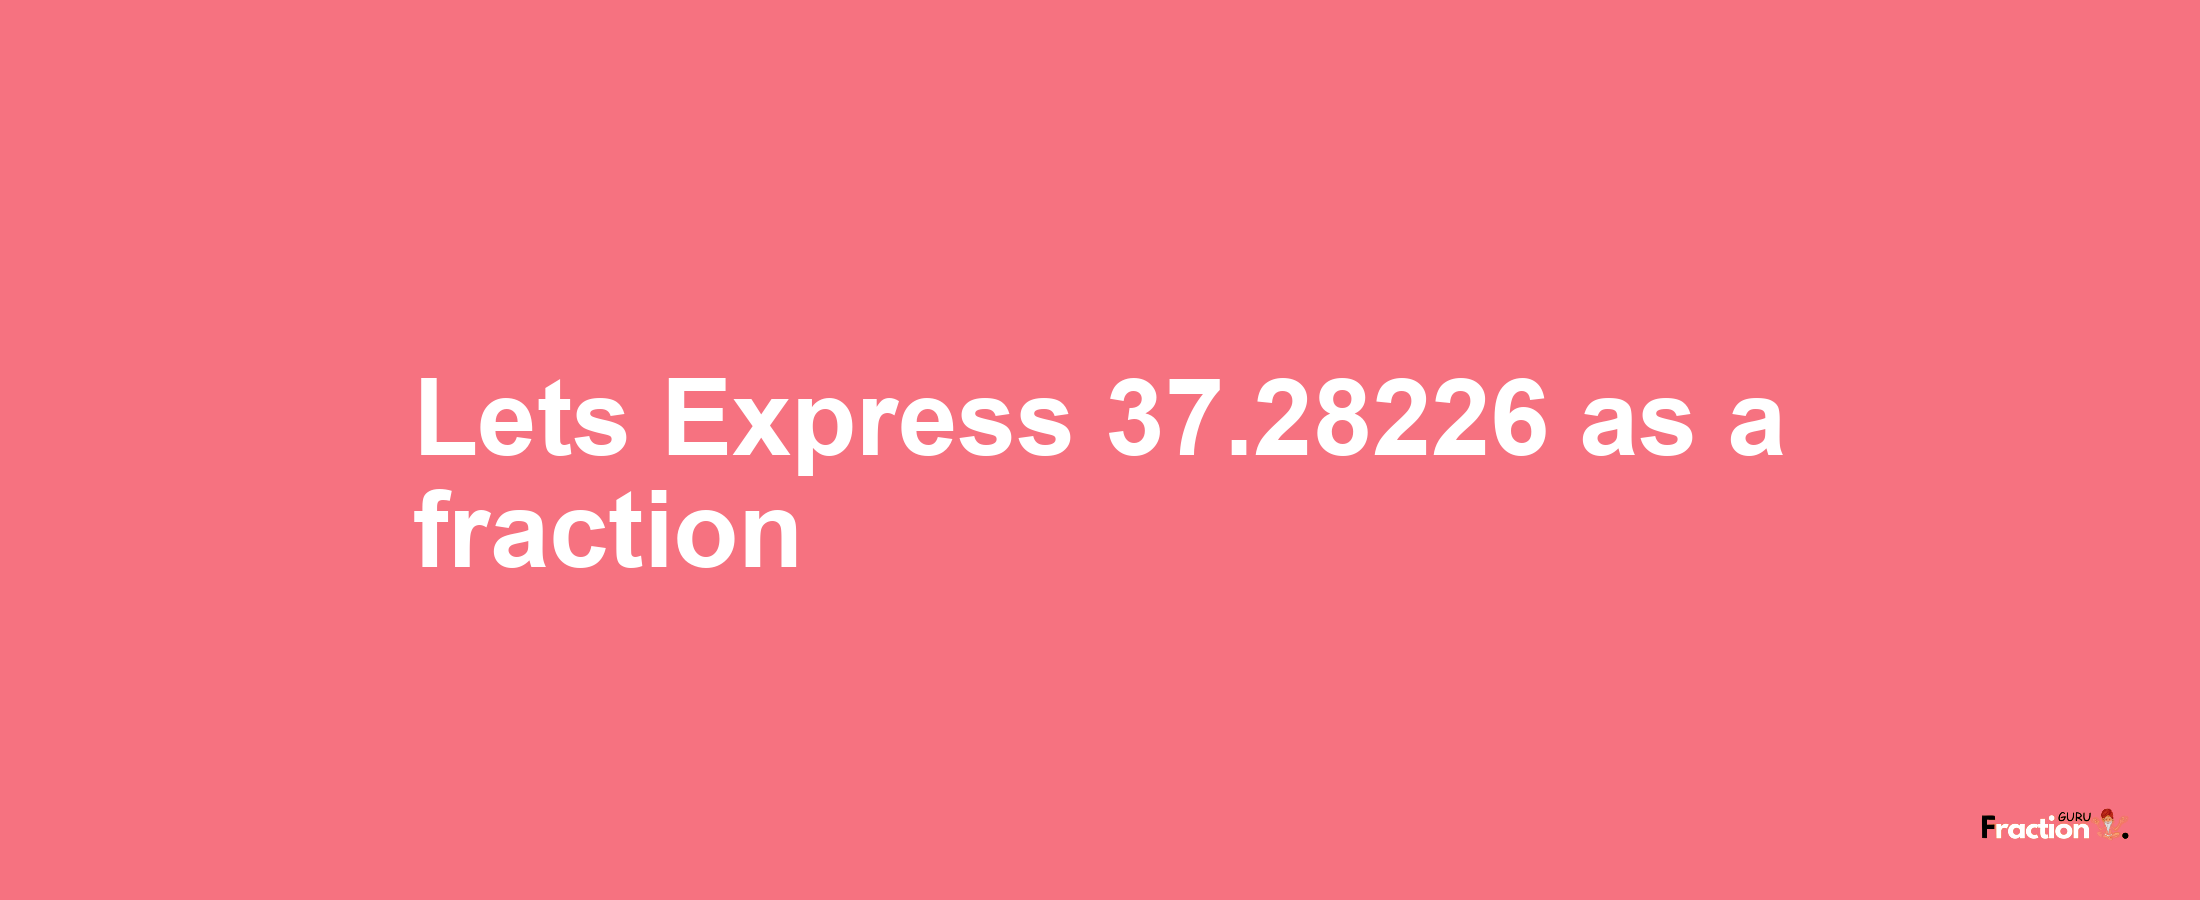 Lets Express 37.28226 as afraction